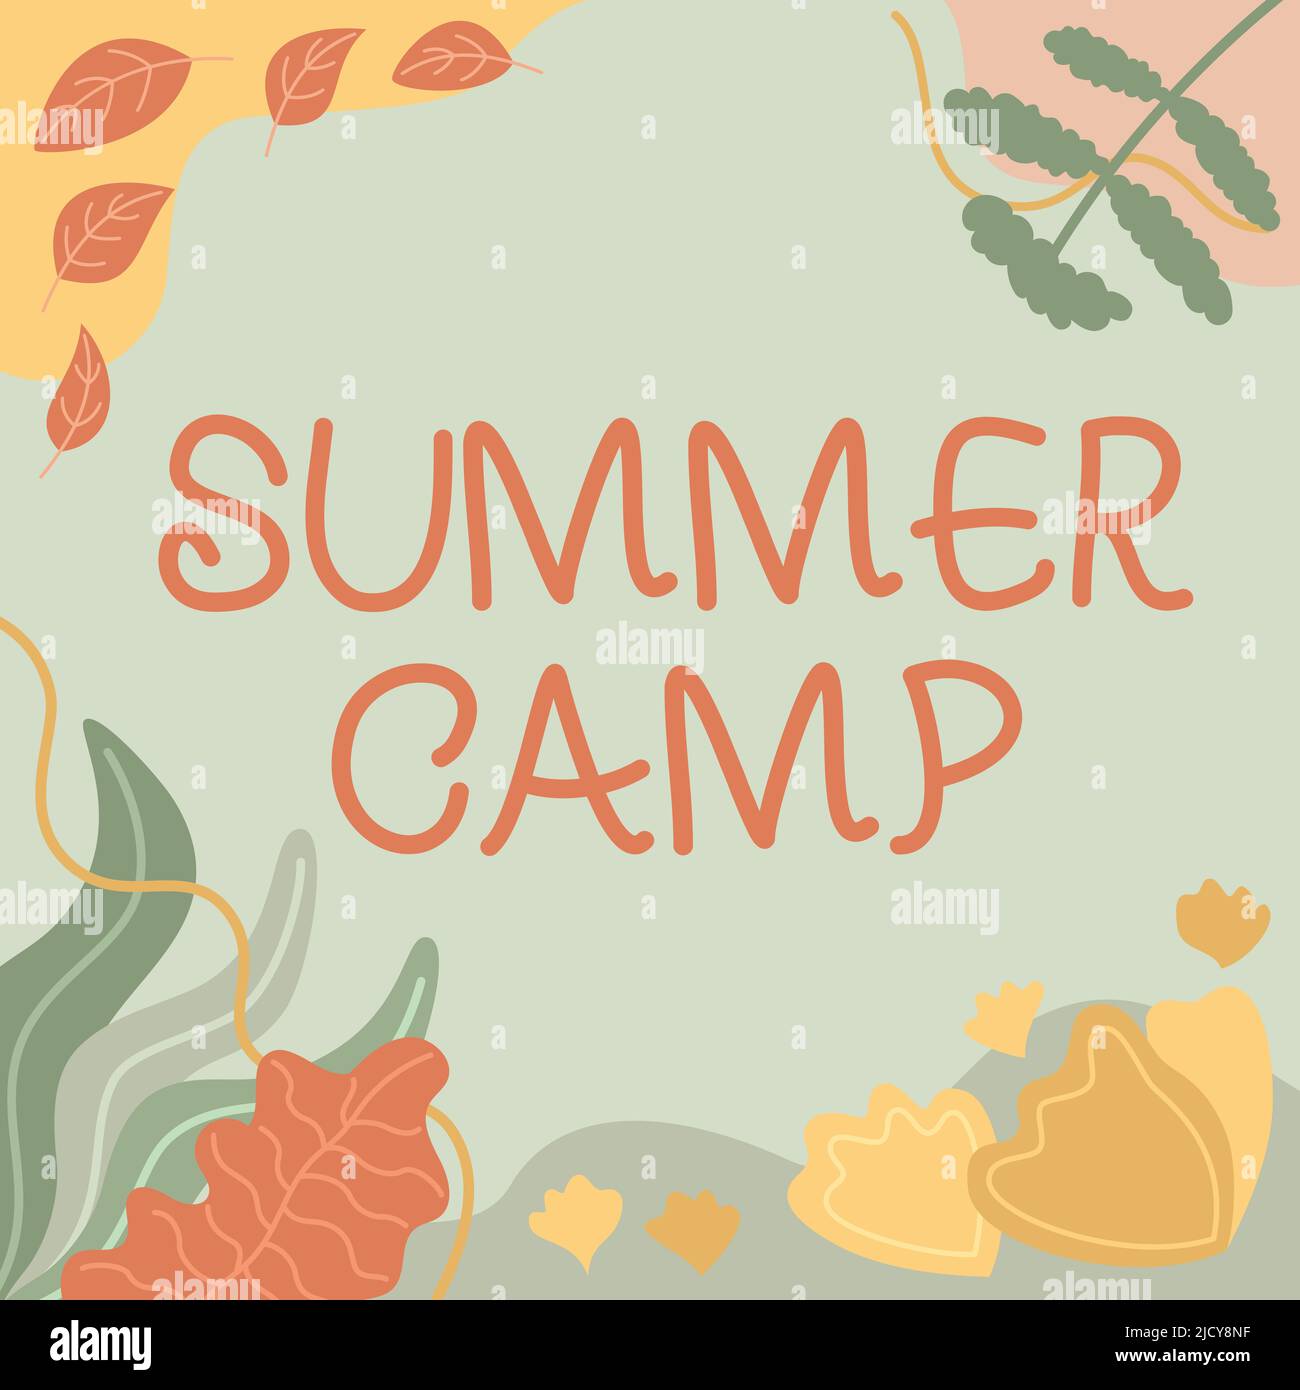 https://c8.alamy.com/comp/2JCY8NF/sign-displaying-summer-camp-internet-concept-supervised-program-for-kids-and-teenagers-during-summertime-blank-frame-decorated-with-abstract-2JCY8NF.jpg